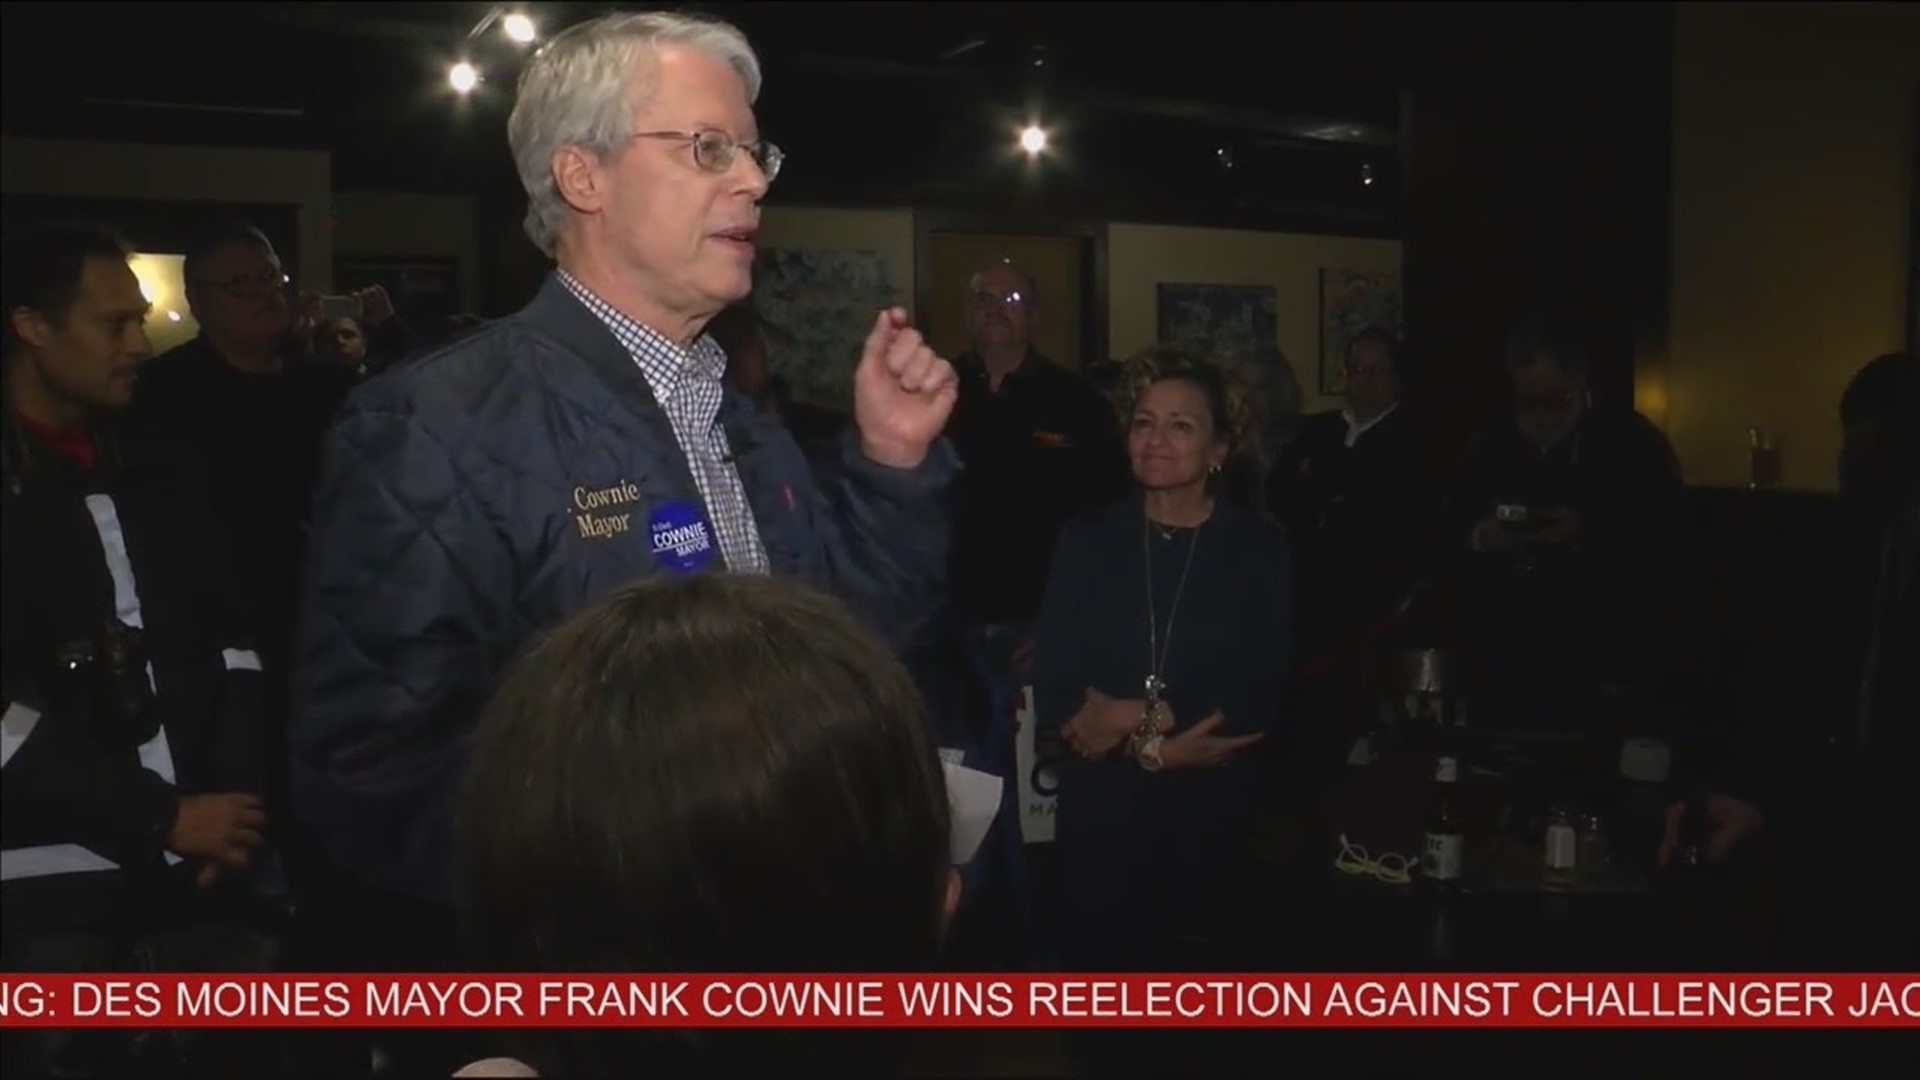 Mayor Frank Cownie wins reelection against challenger Jack Hatch